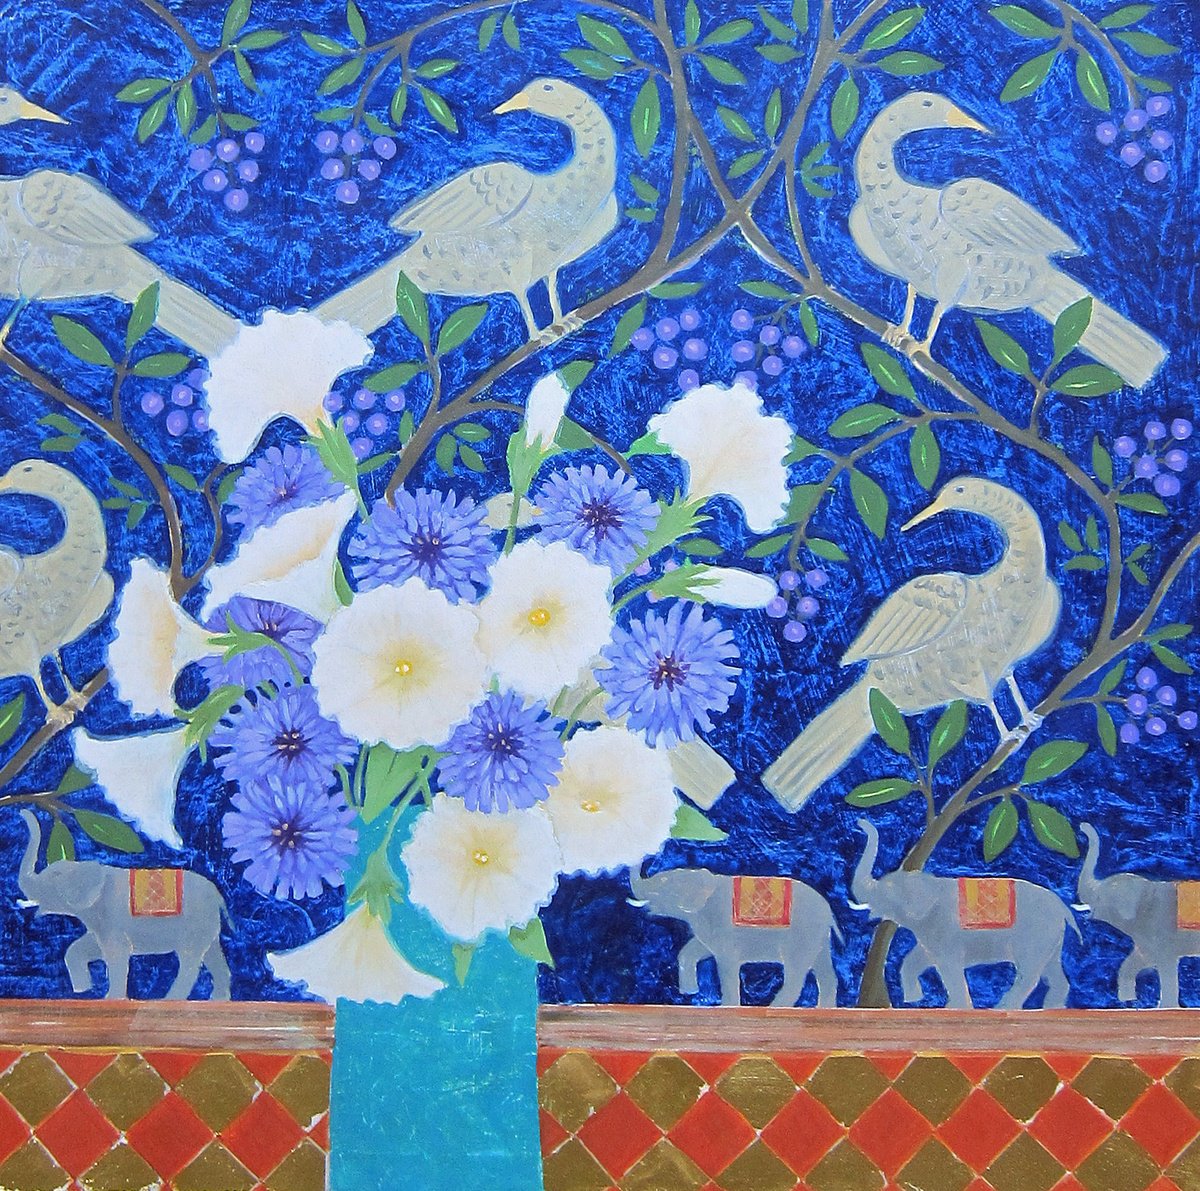 Elephants and Birds by Sophie Colmer-Stocker